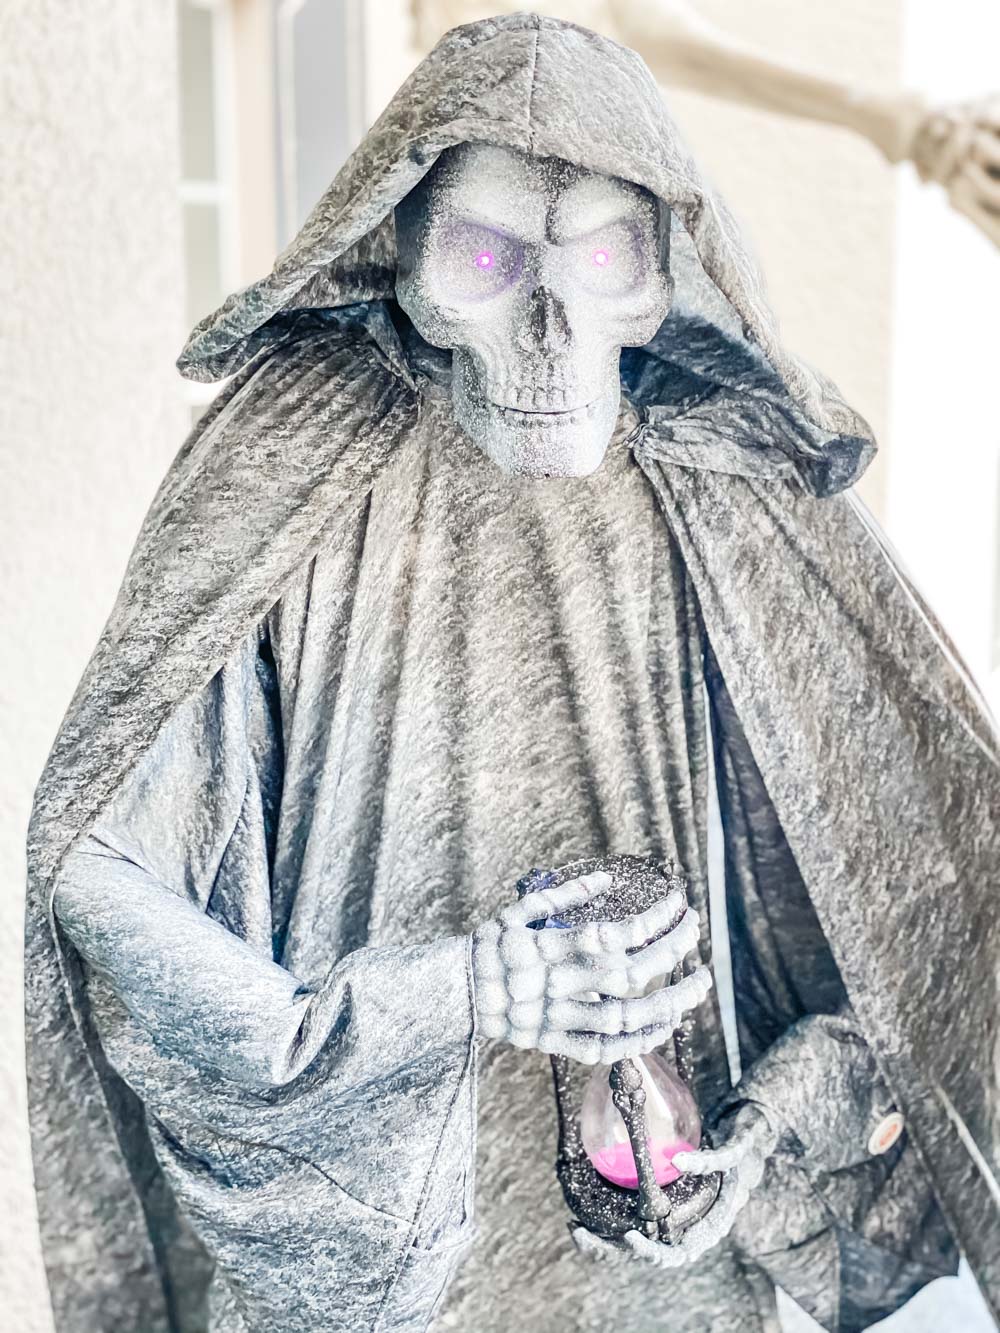 A spooky cemetery statue with glowing purple eyes.